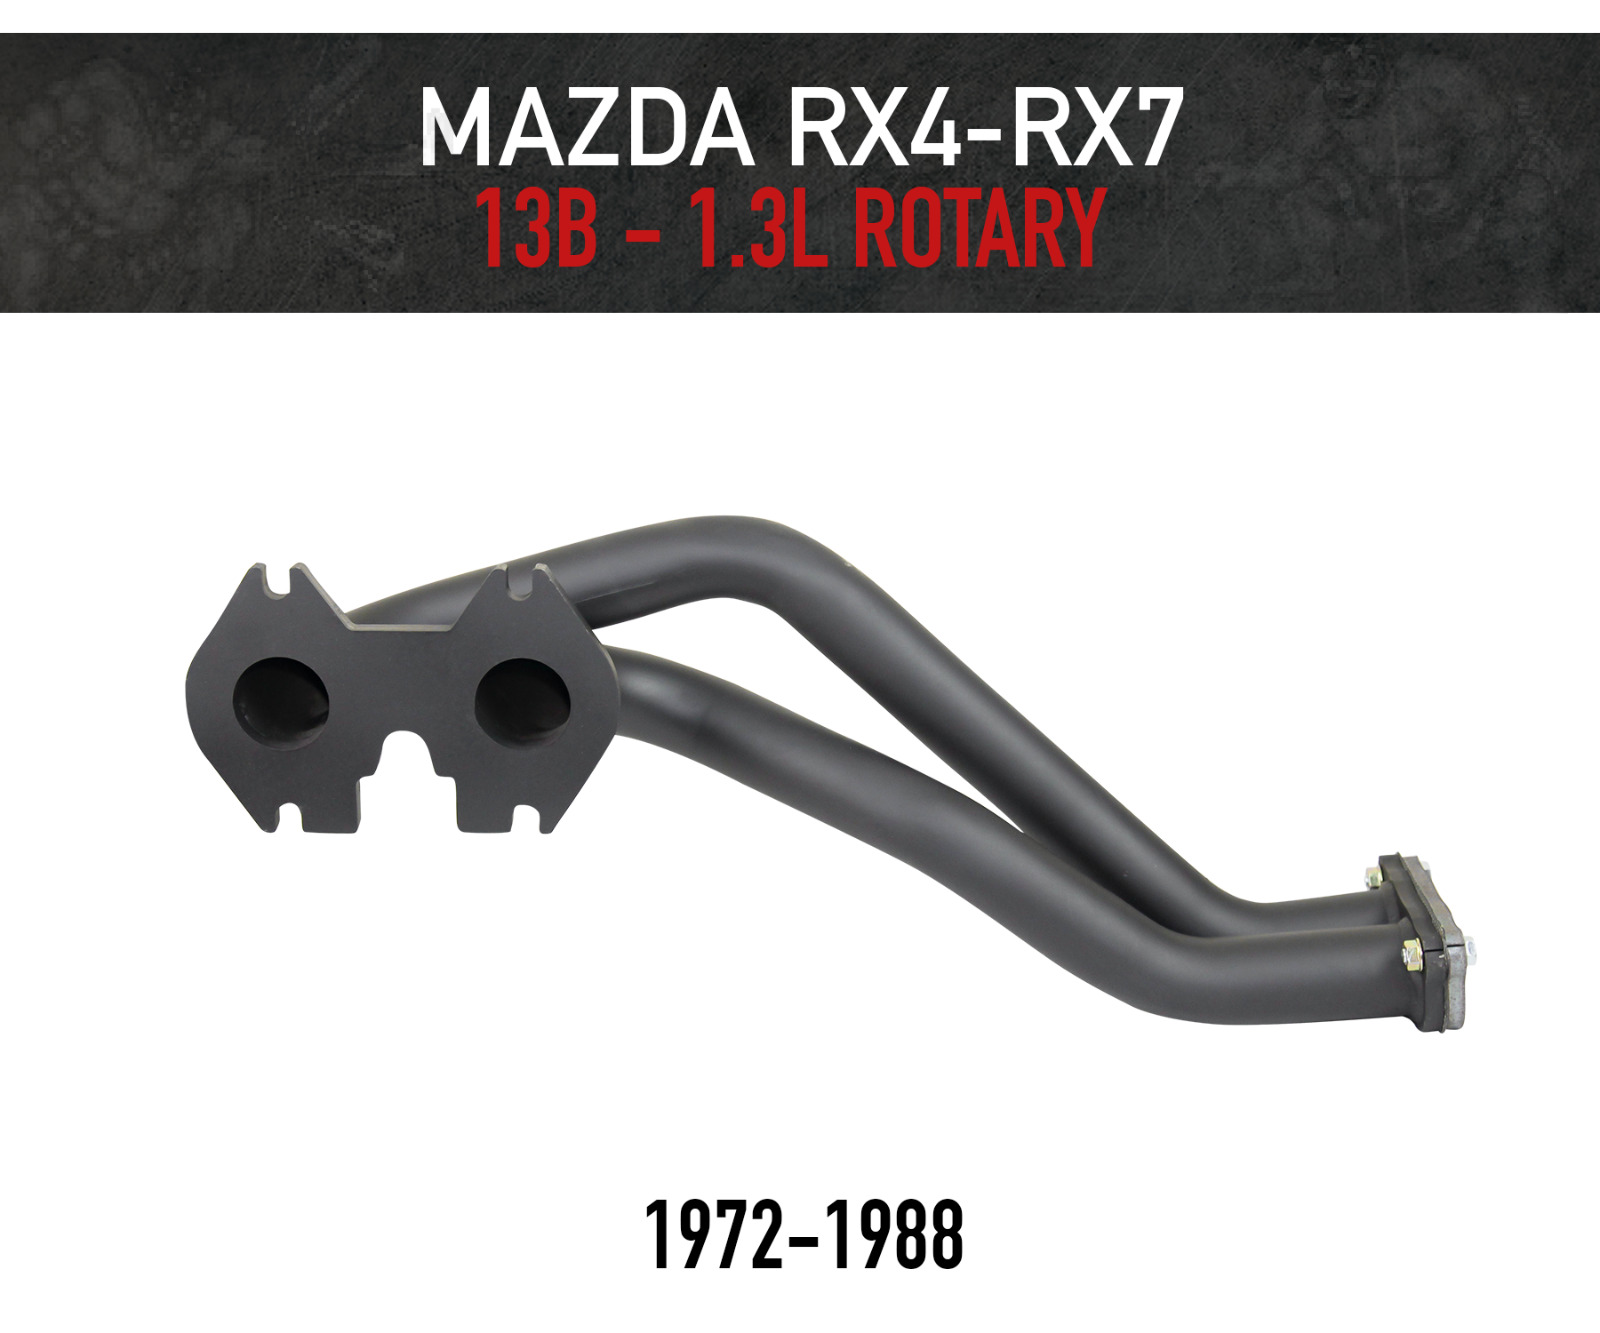 Headers / Extractors for Mazda RX4, RX5, & RX7 - 13B 1.3L Rotary